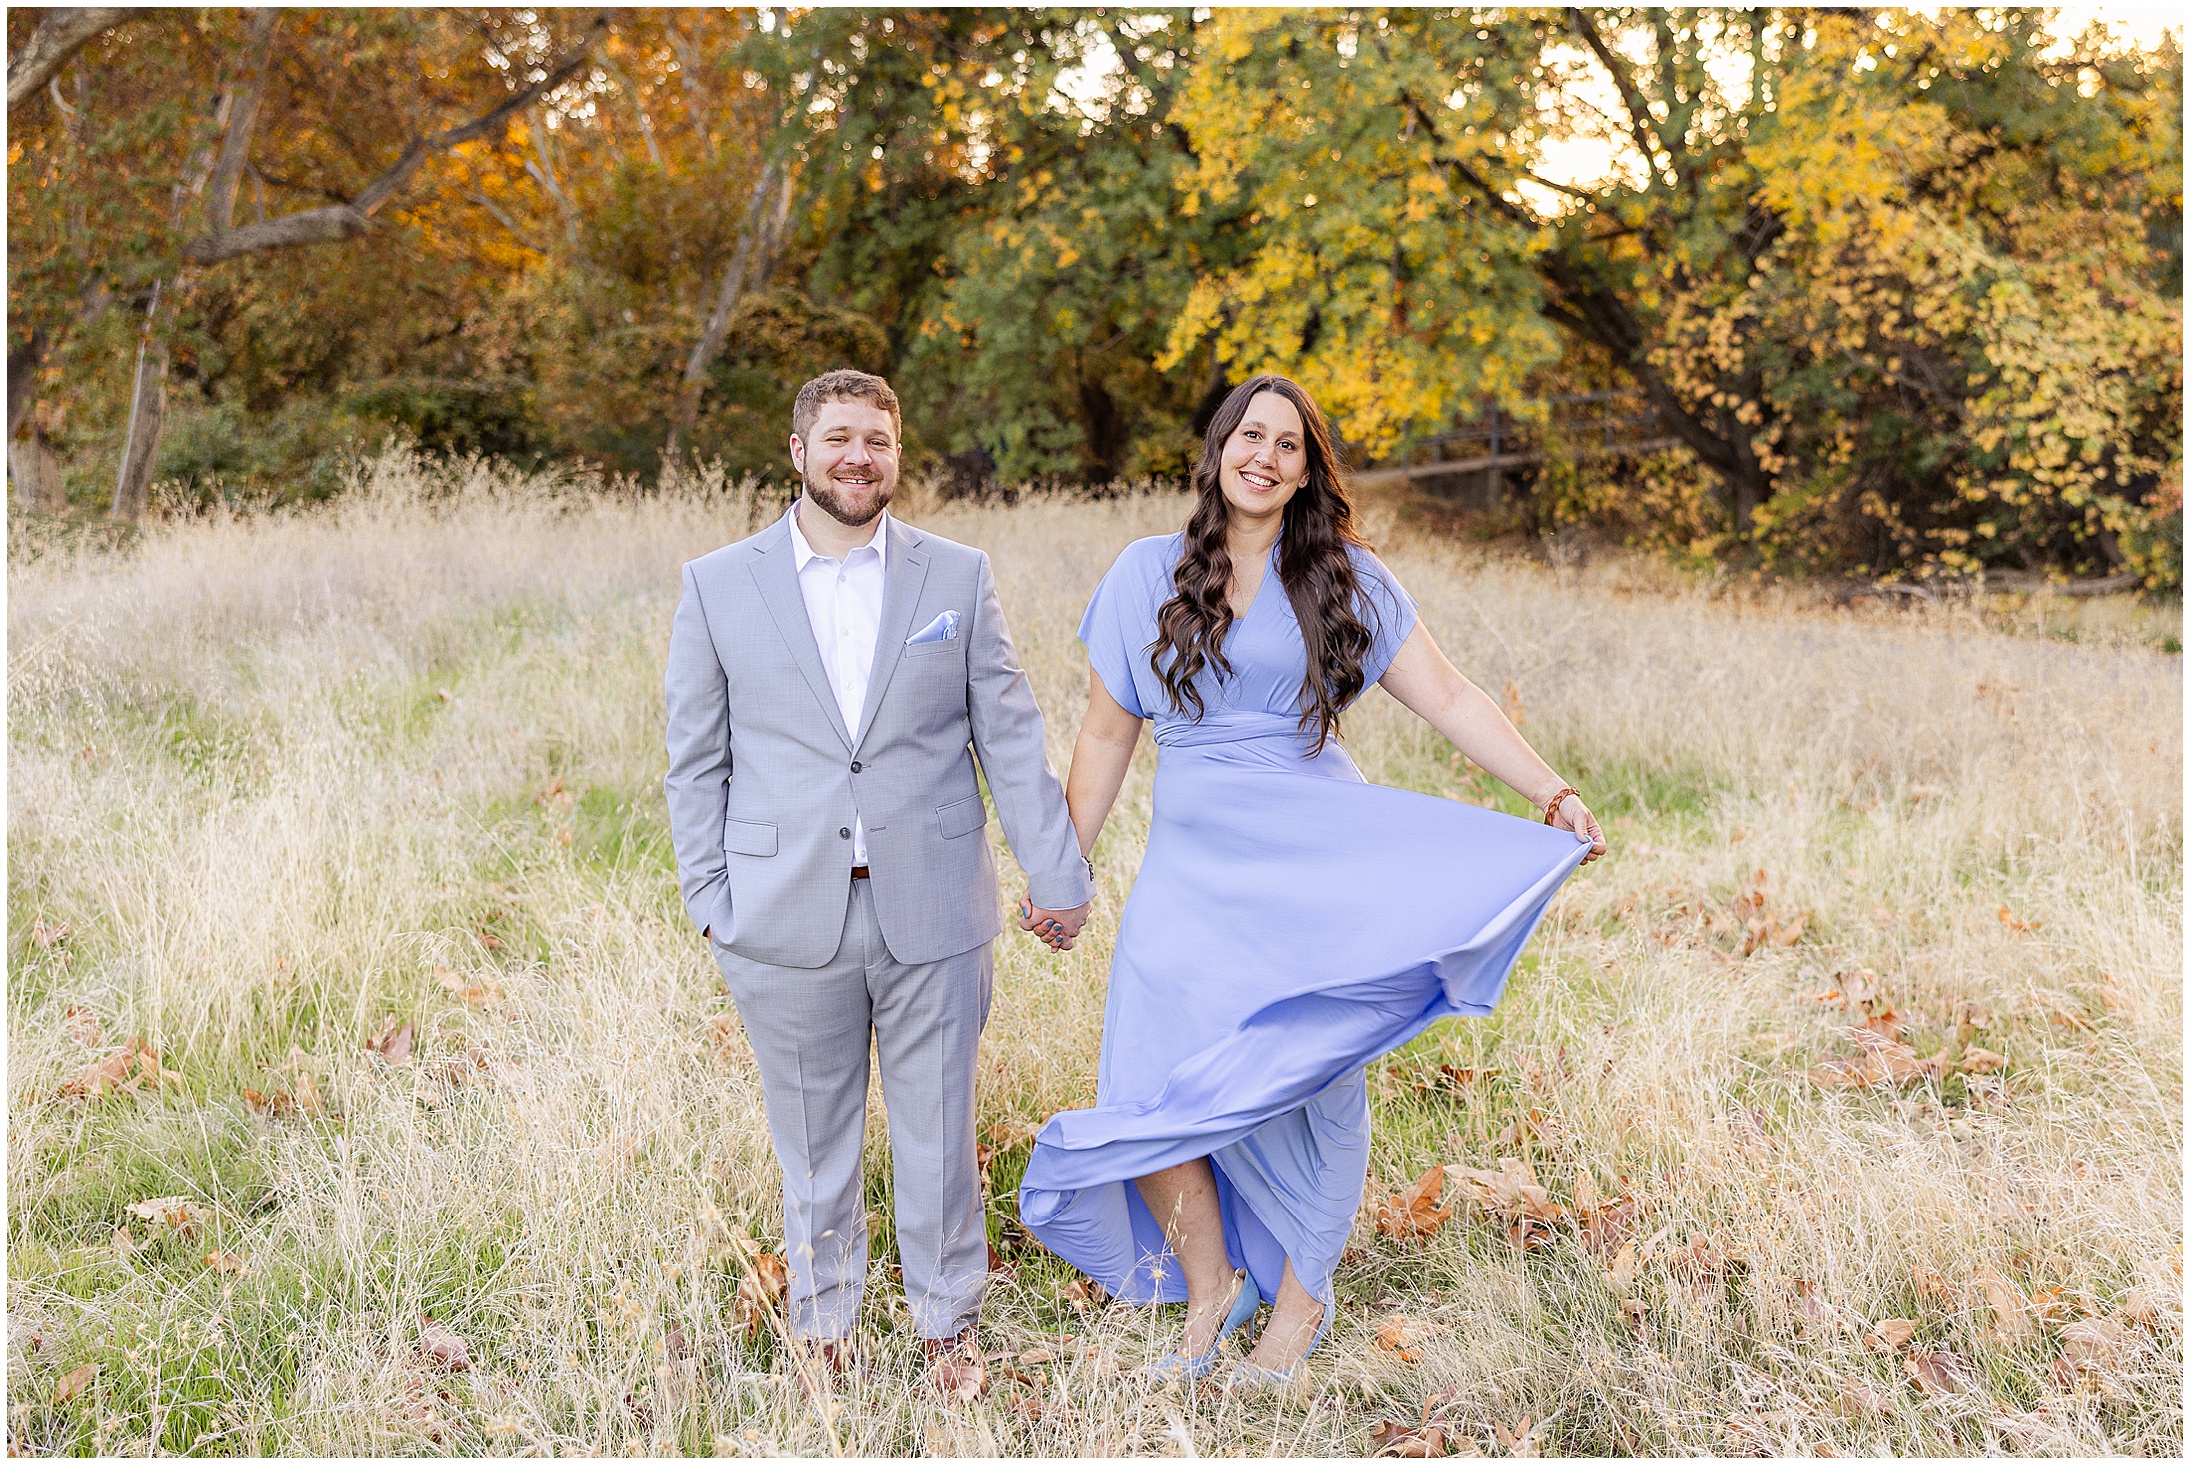 Walking in the park for engagement session | Courtney + Todd